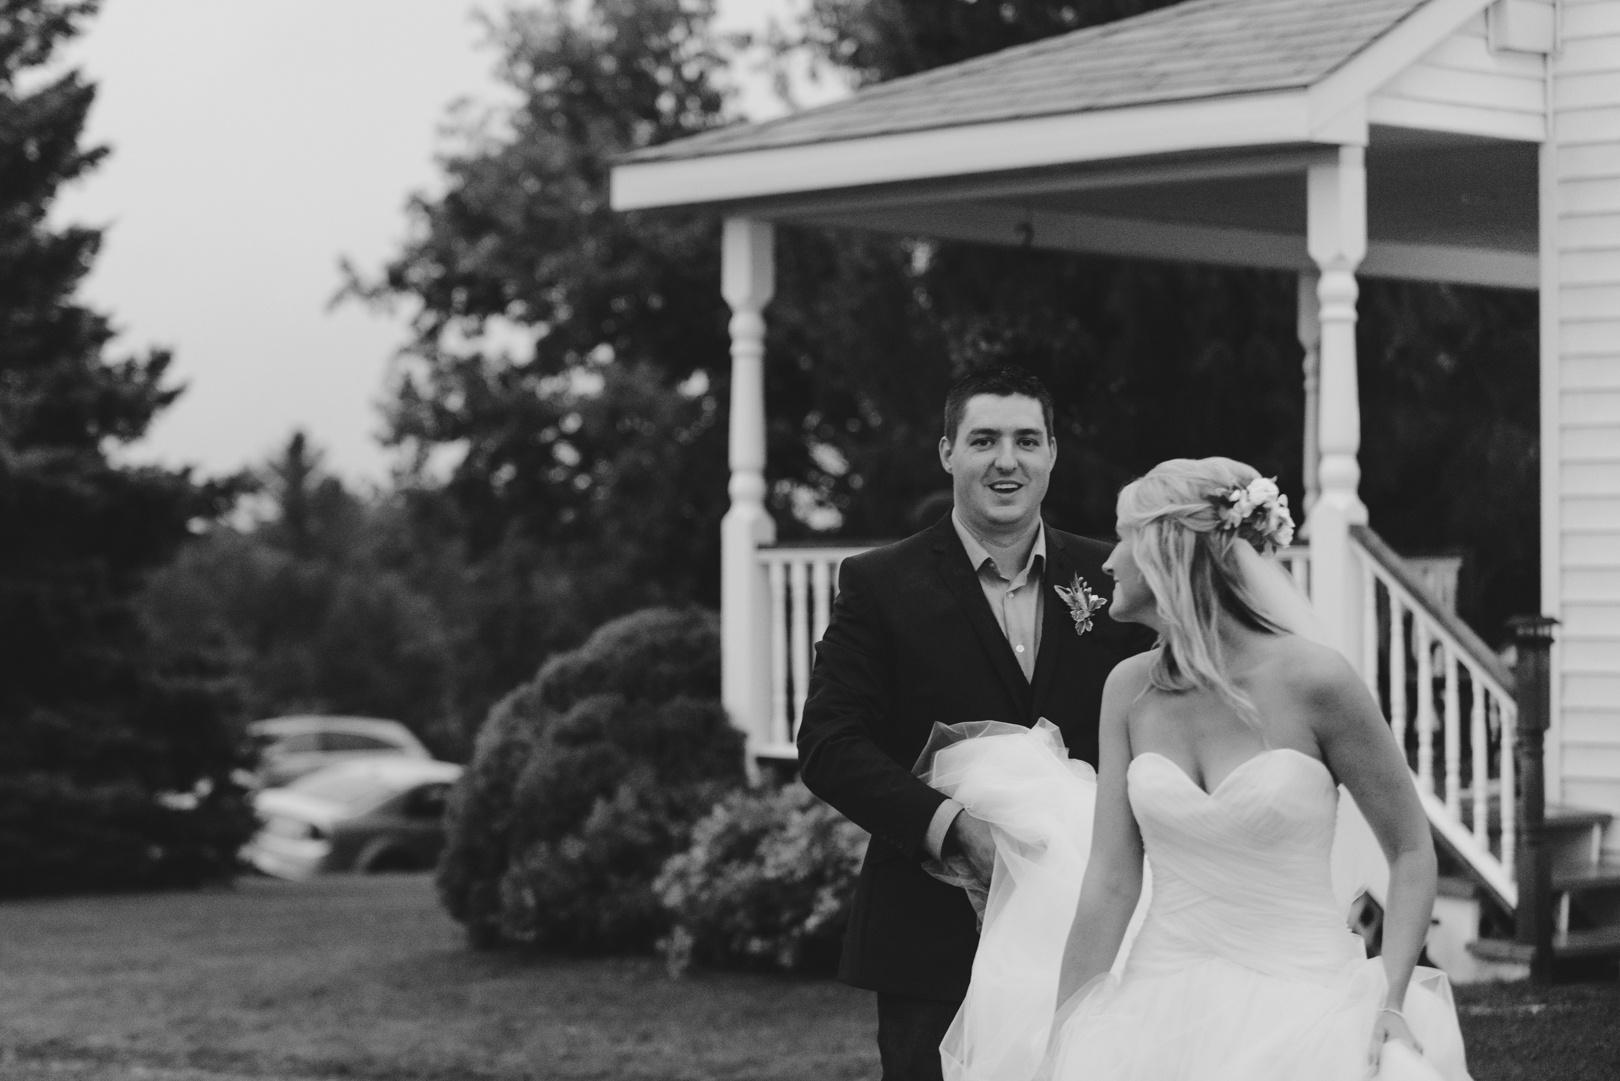 bride walking with her groom in front of farm house